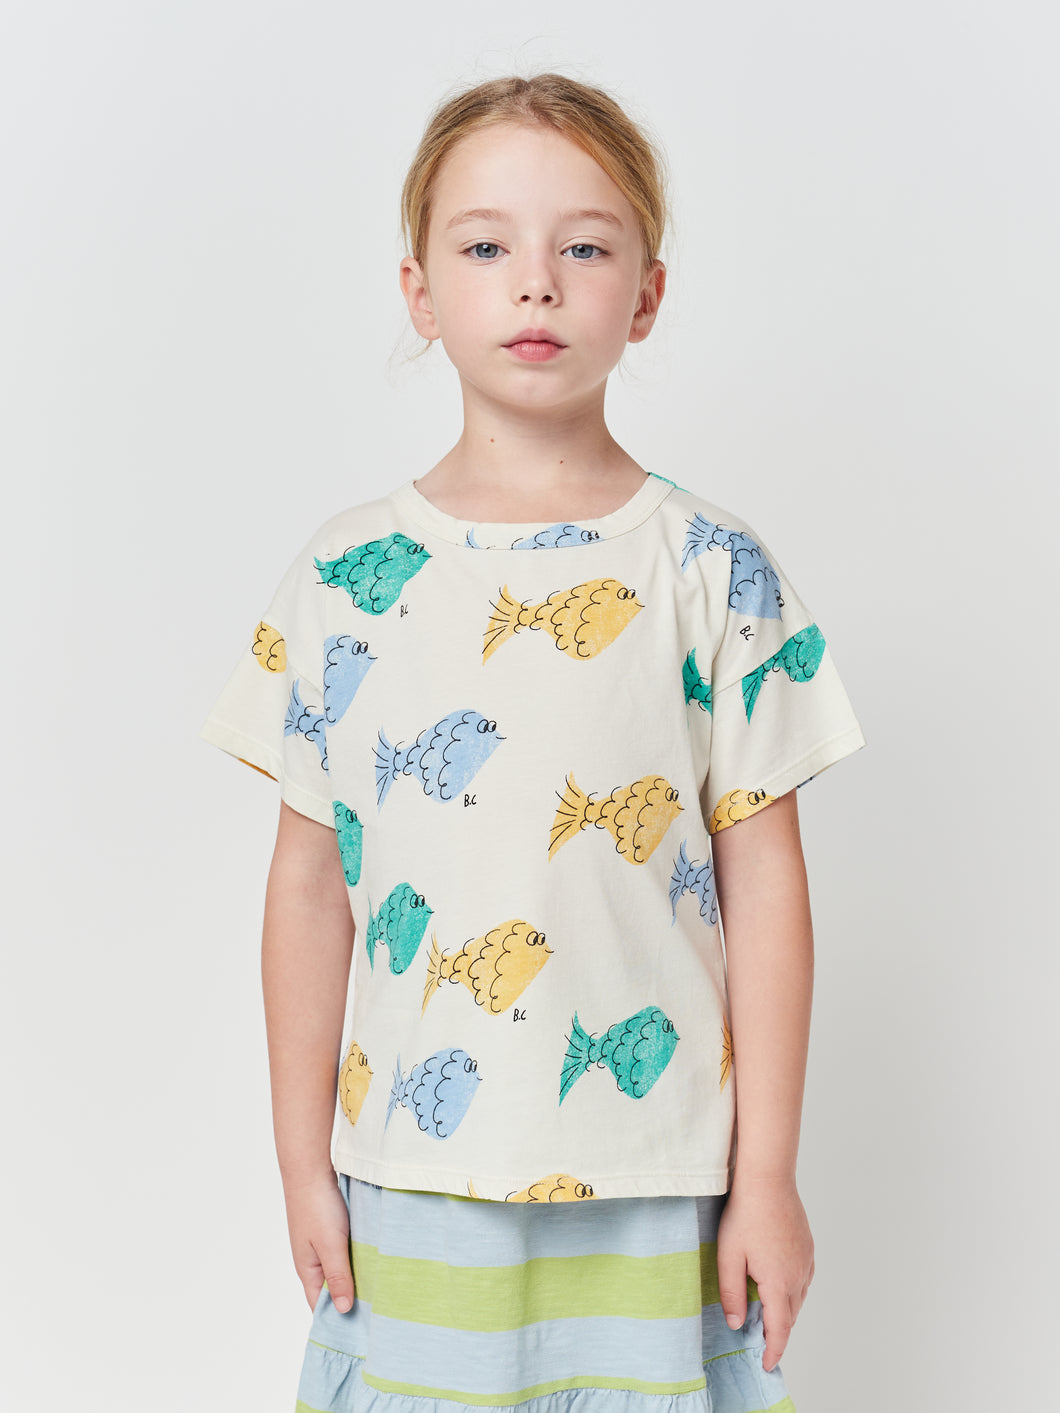 Multicolor Fish all over T-shirt 23SS / ボボショーズ フィッシュ柄 半袖Tシャツ お魚